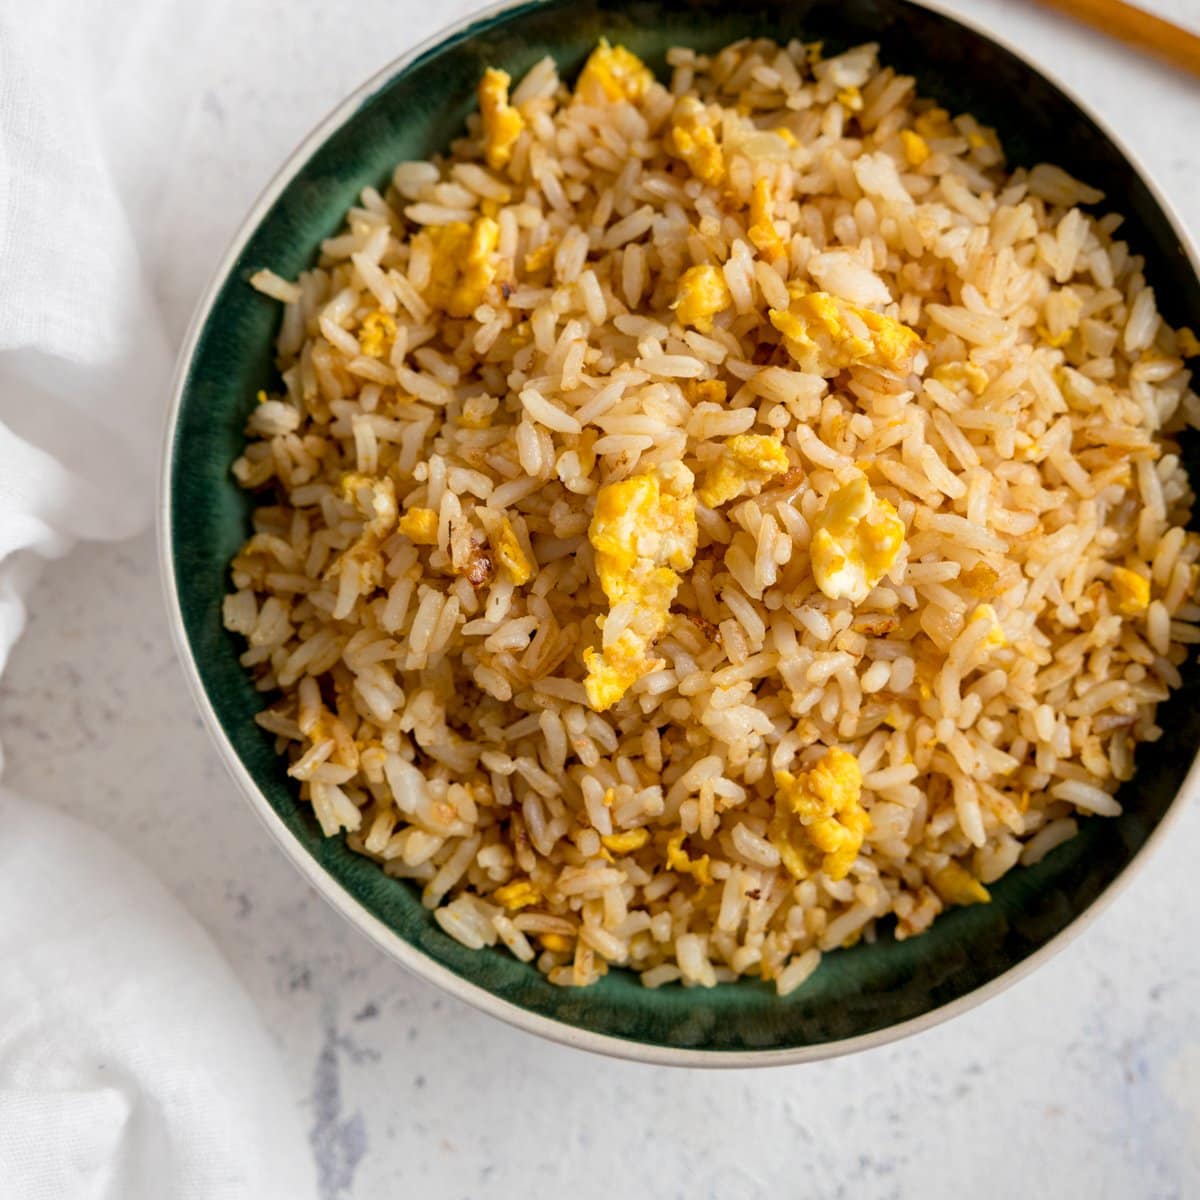 Classic Fried Rice Recipe made with Instant Rice